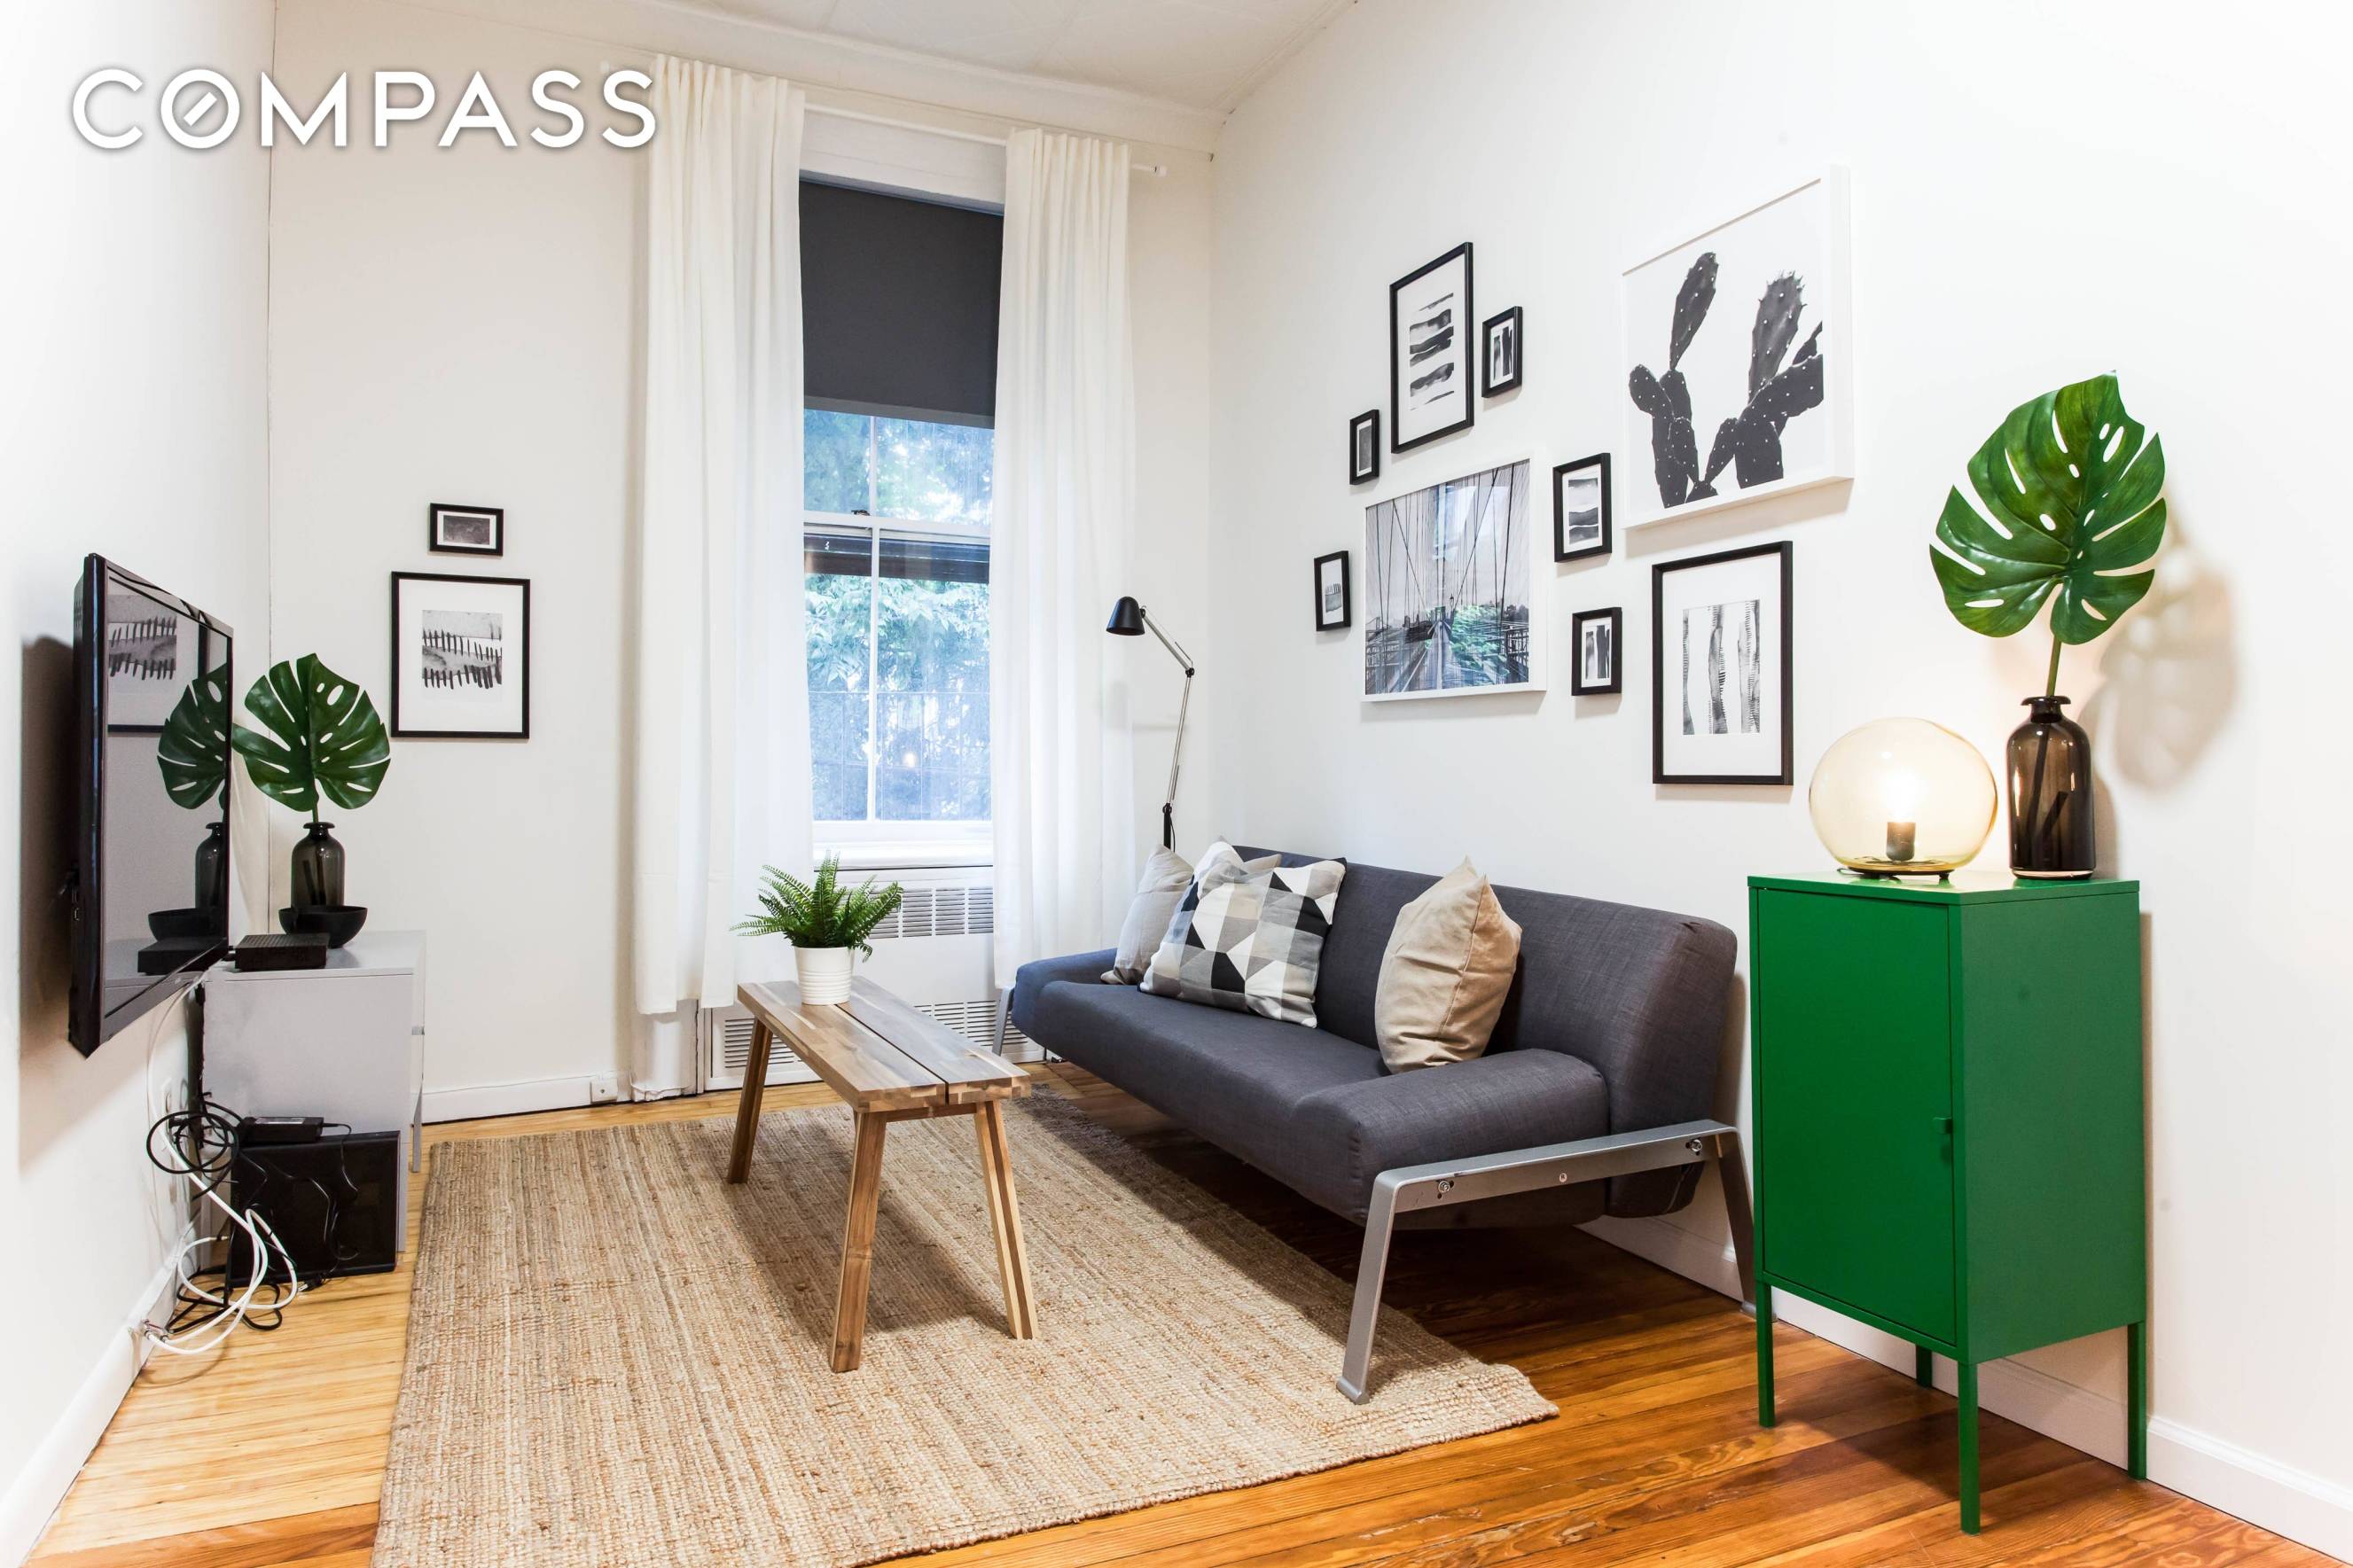 BROOKLYN HEIGHTS This split two bedroom with high ceilings is conveniently located steps to the Brooklyn Bridge Park and walk to subway.